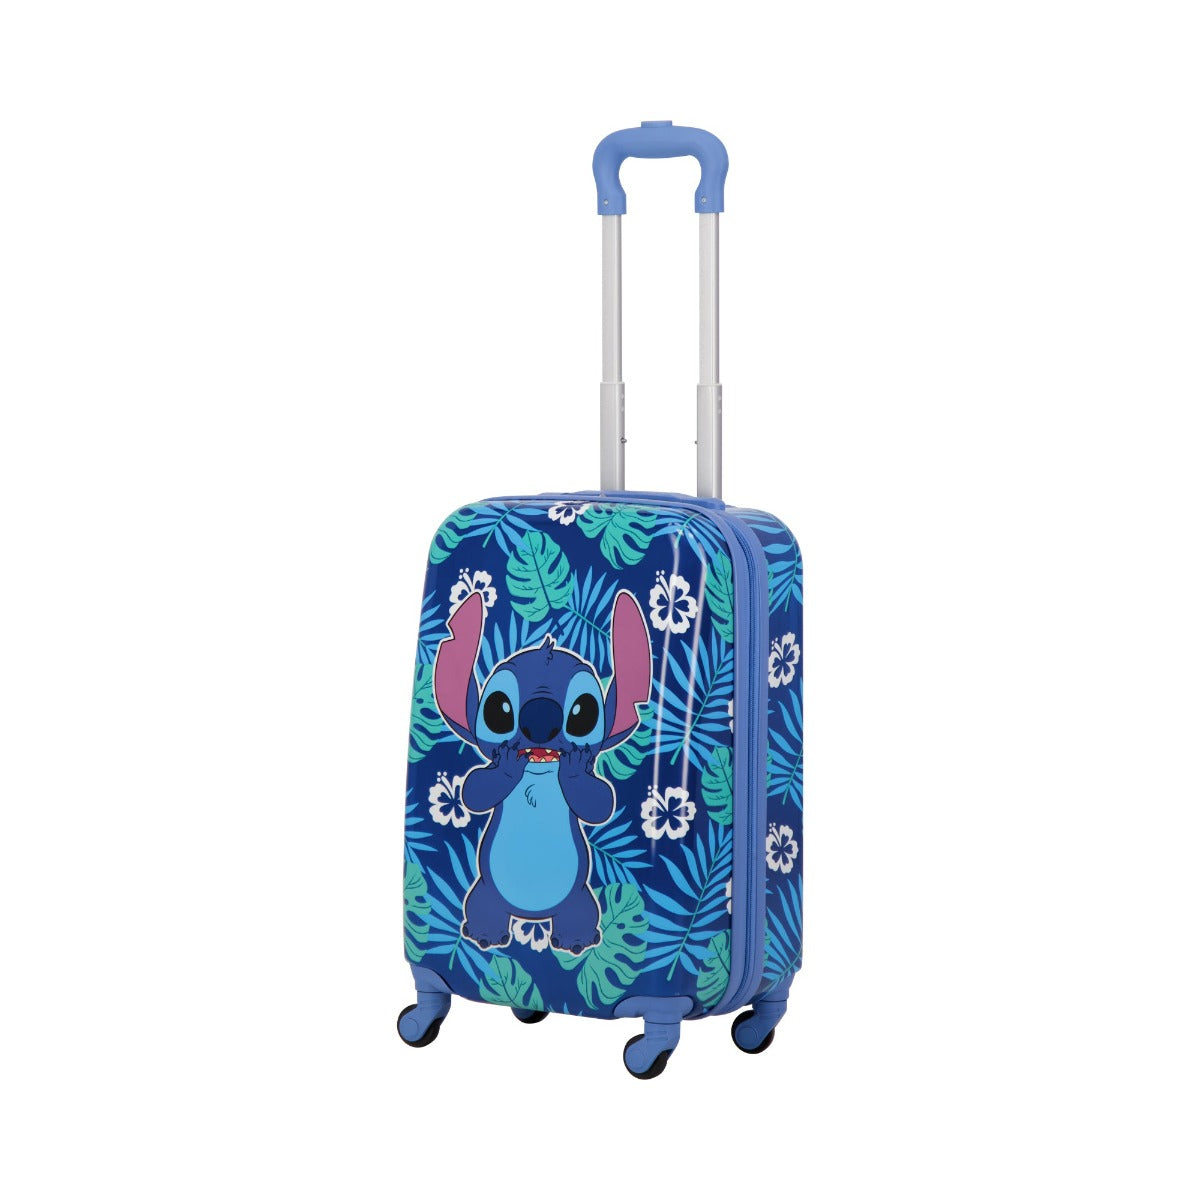 Disney Ful Stitch tropical leaves matching 2 piece set - 21" carry-on suitcase for kids